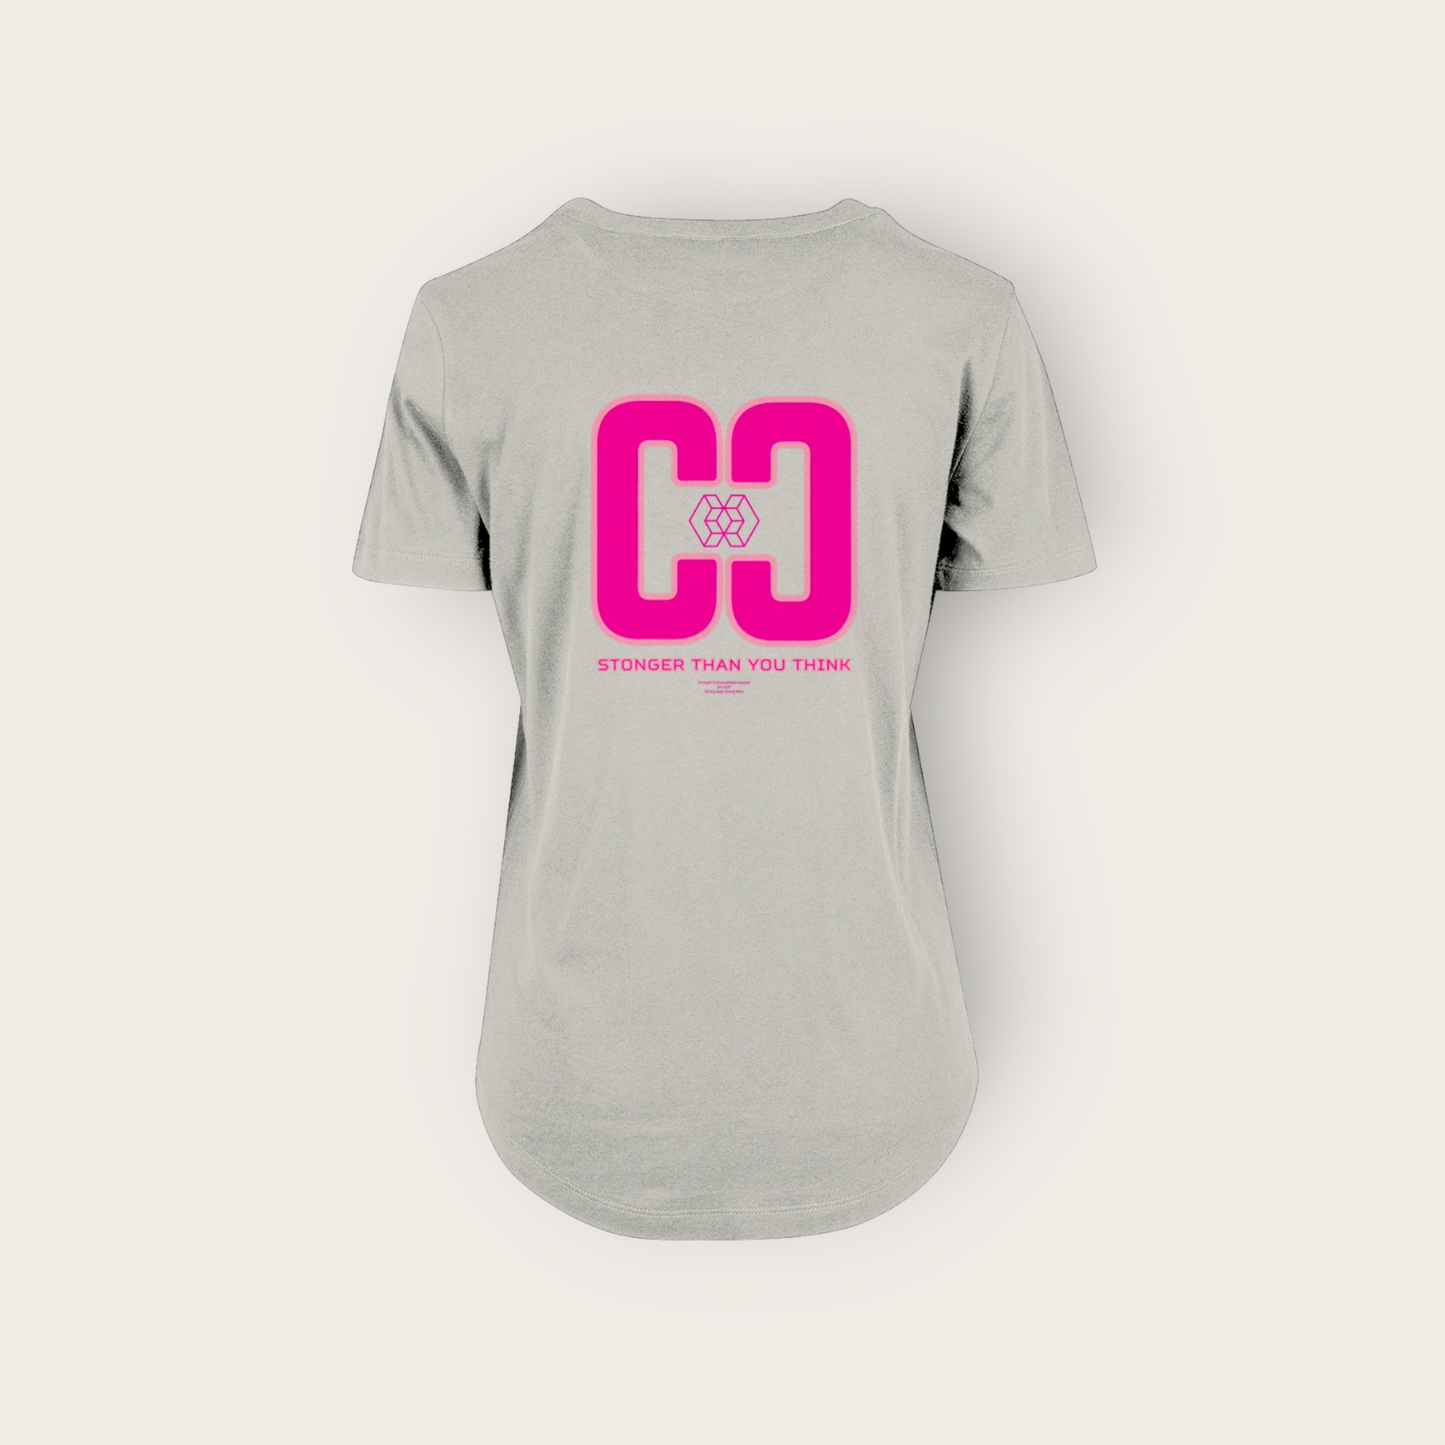 CORE Women's Fit Pink CC Tee